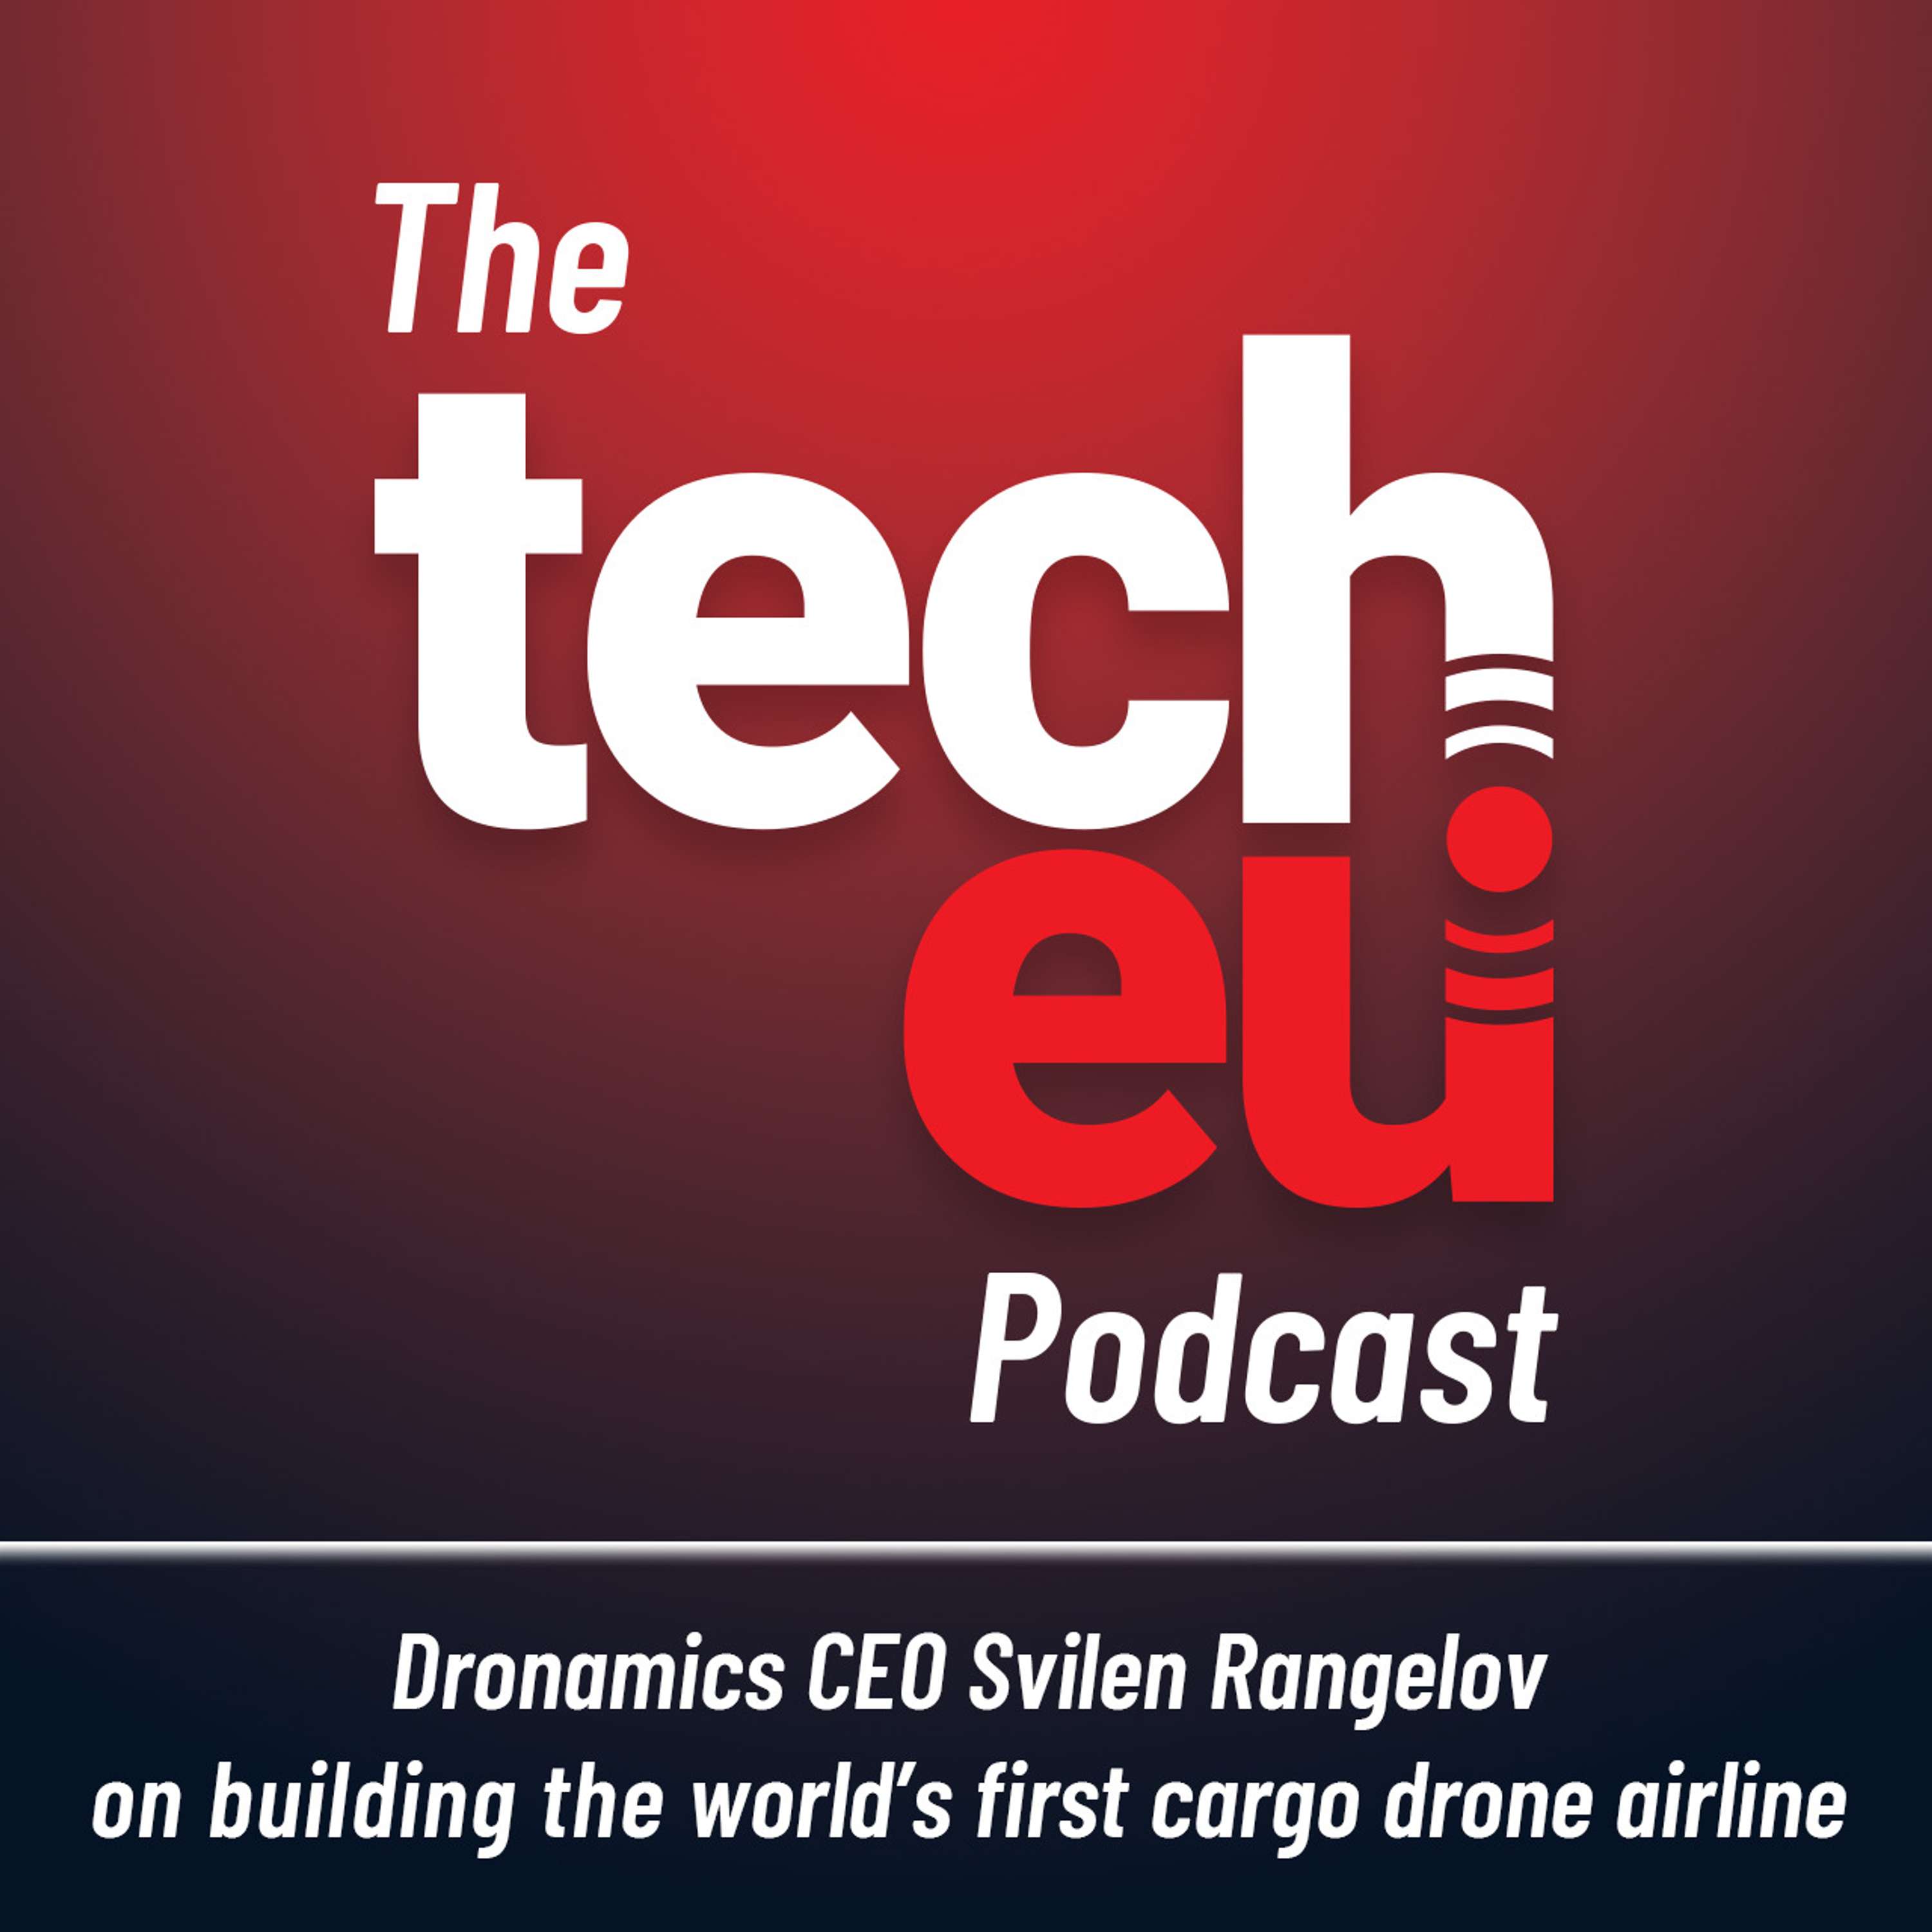 Dronamics CEO Svilen Rangelov on building the first cargo drone airline in the world (out of Bulgaria)